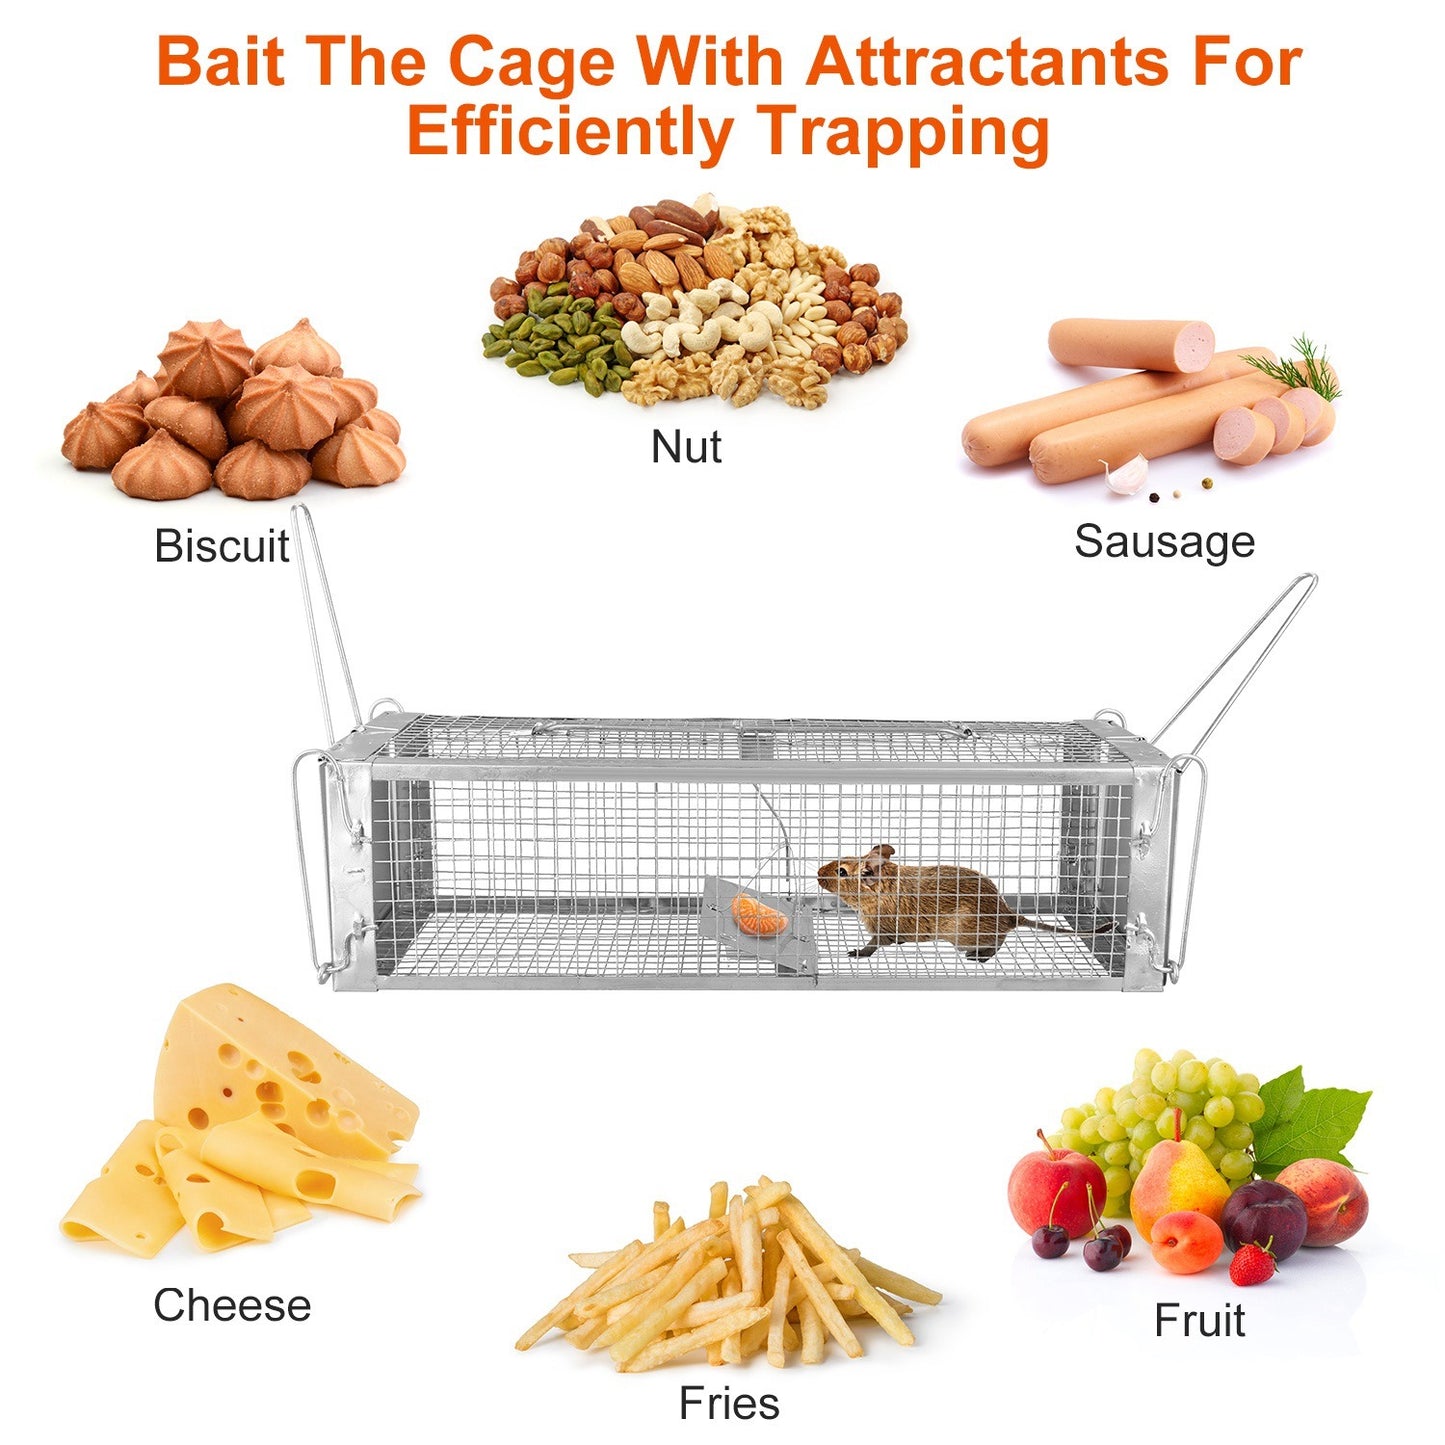 Dual Door Rat Trap Cage Humane Live Rodent Dense Mesh Trap Cage Zinc Electroplating Mice Mouse Control Bait Catch with 2 Detachable U Shaped Rod